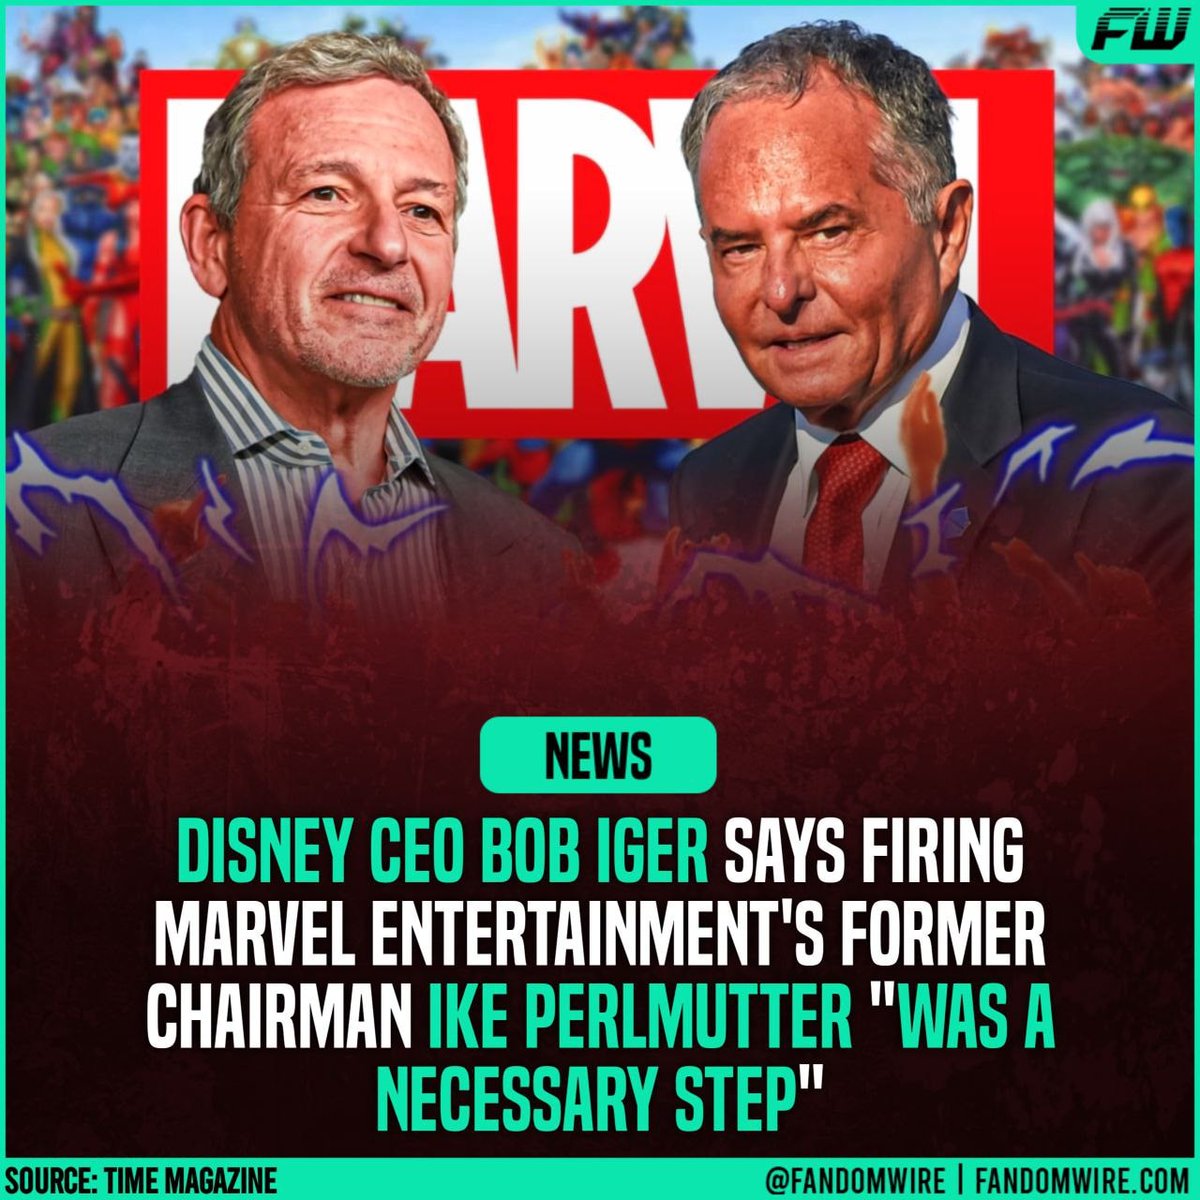 What are your views on it? 😳
#MarvelEntertainment #IkePerlmutter #BobIger #Disney

(Via @TIME)